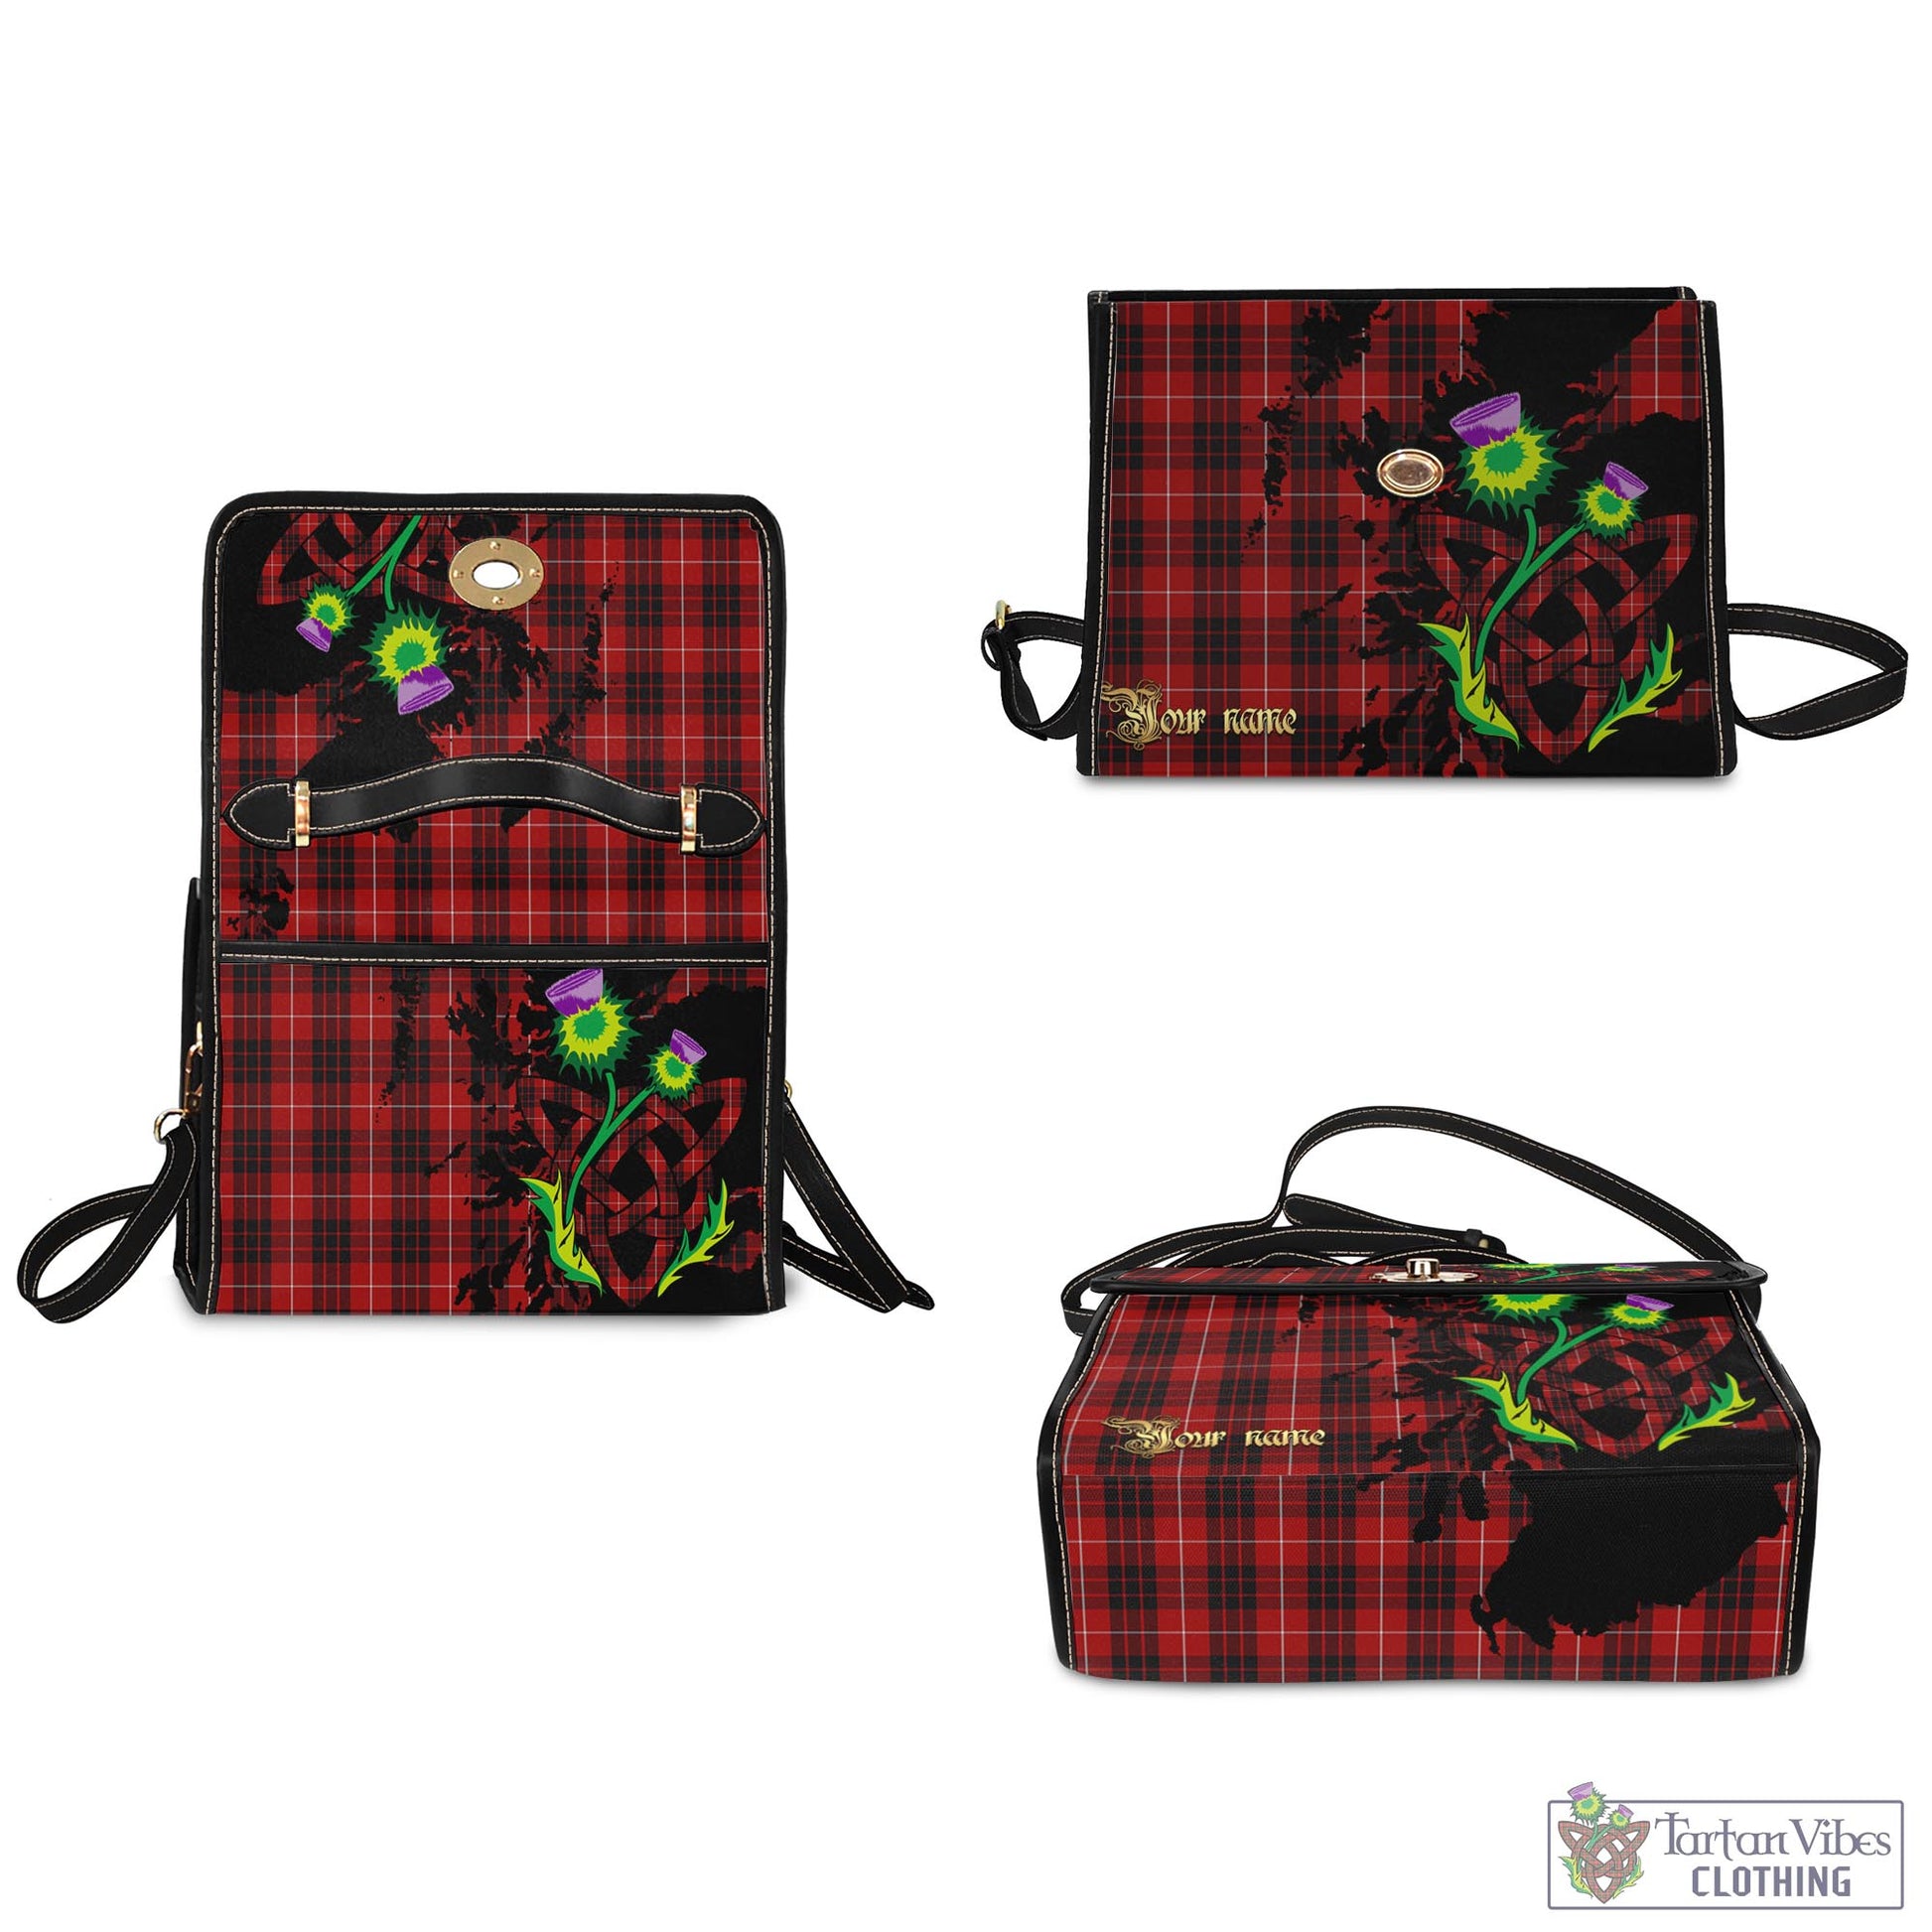 Tartan Vibes Clothing Munro Black and Red Tartan Waterproof Canvas Bag with Scotland Map and Thistle Celtic Accents